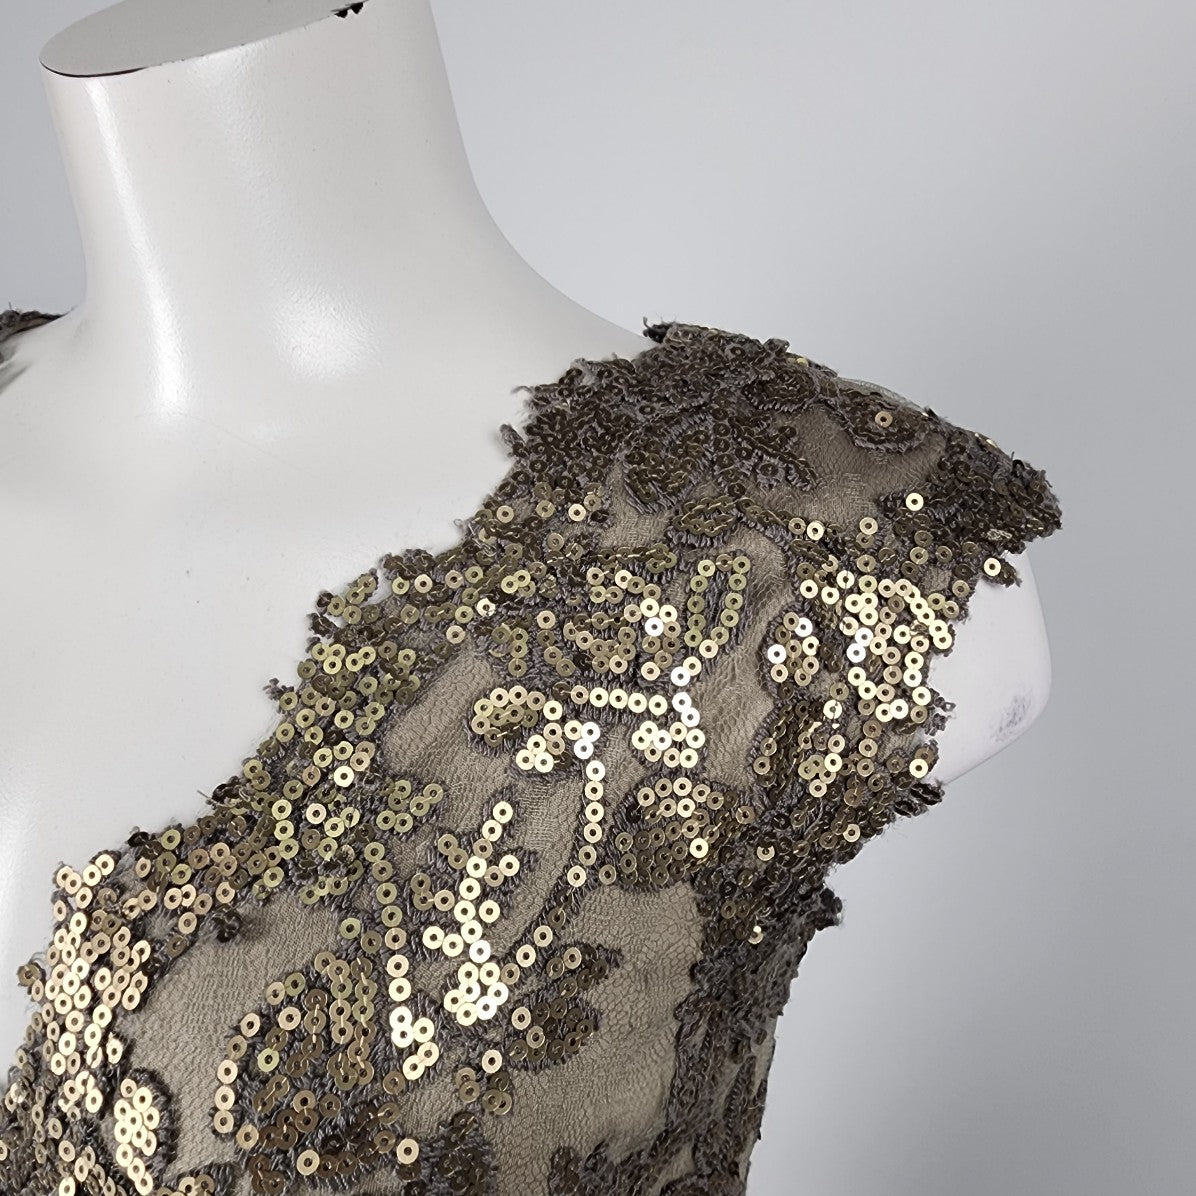 Tadashi Shoji Gold Sequined Lace Overlay Gown Dress Size 8